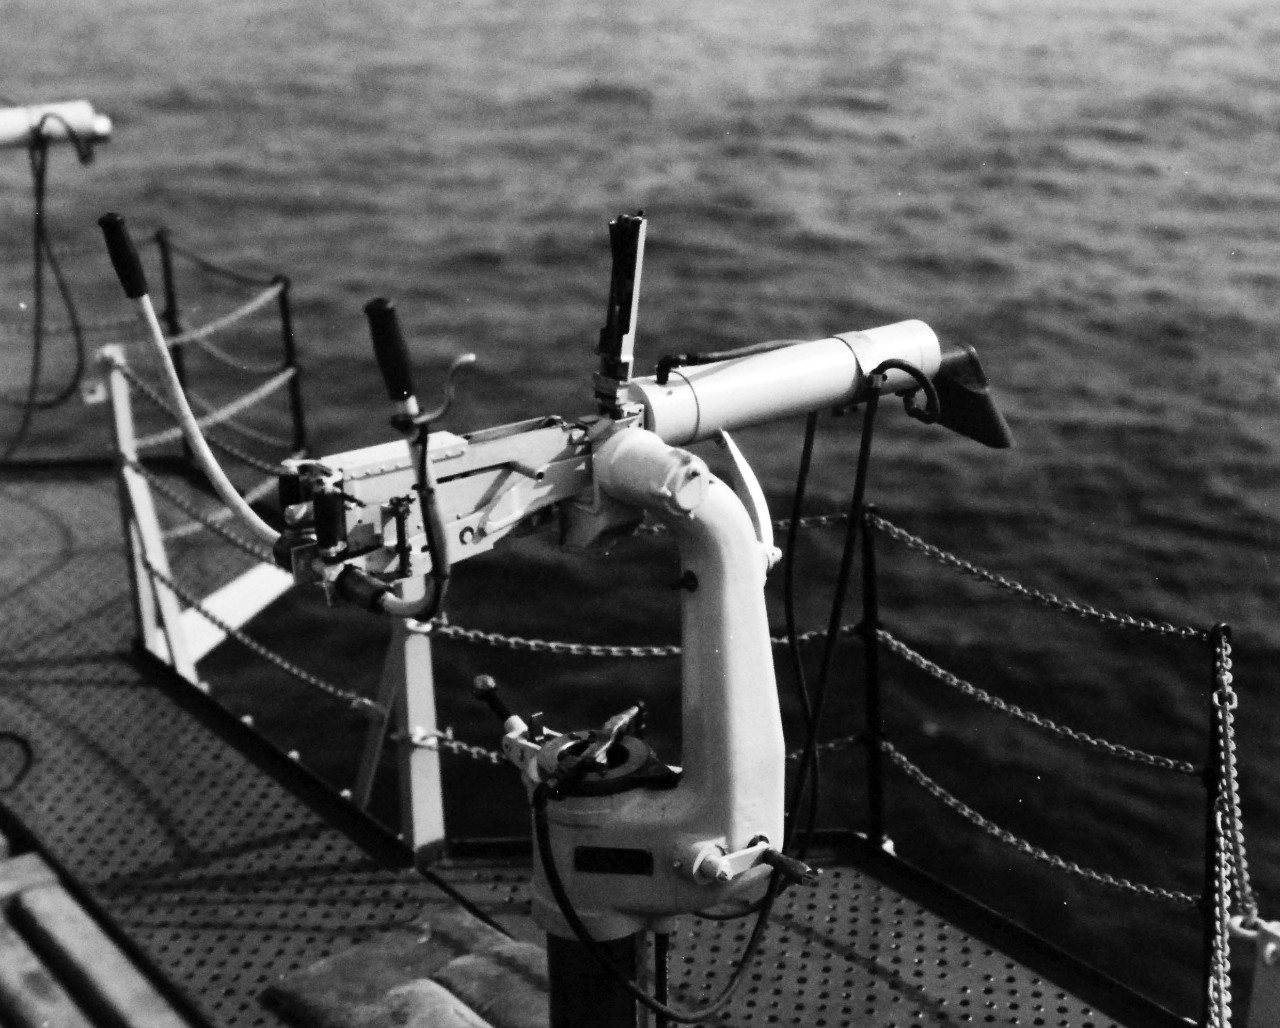 80-CF-CV4-912:   USS Ranger (CV-4), 1939.    Three-fourths view of .50 cal. Machine gun with smoke and flash dissipater attached, October 25, 1939.  .    Official U.S. Navy Photograph, now in the collections of the National Archives.  (2014/12/30).